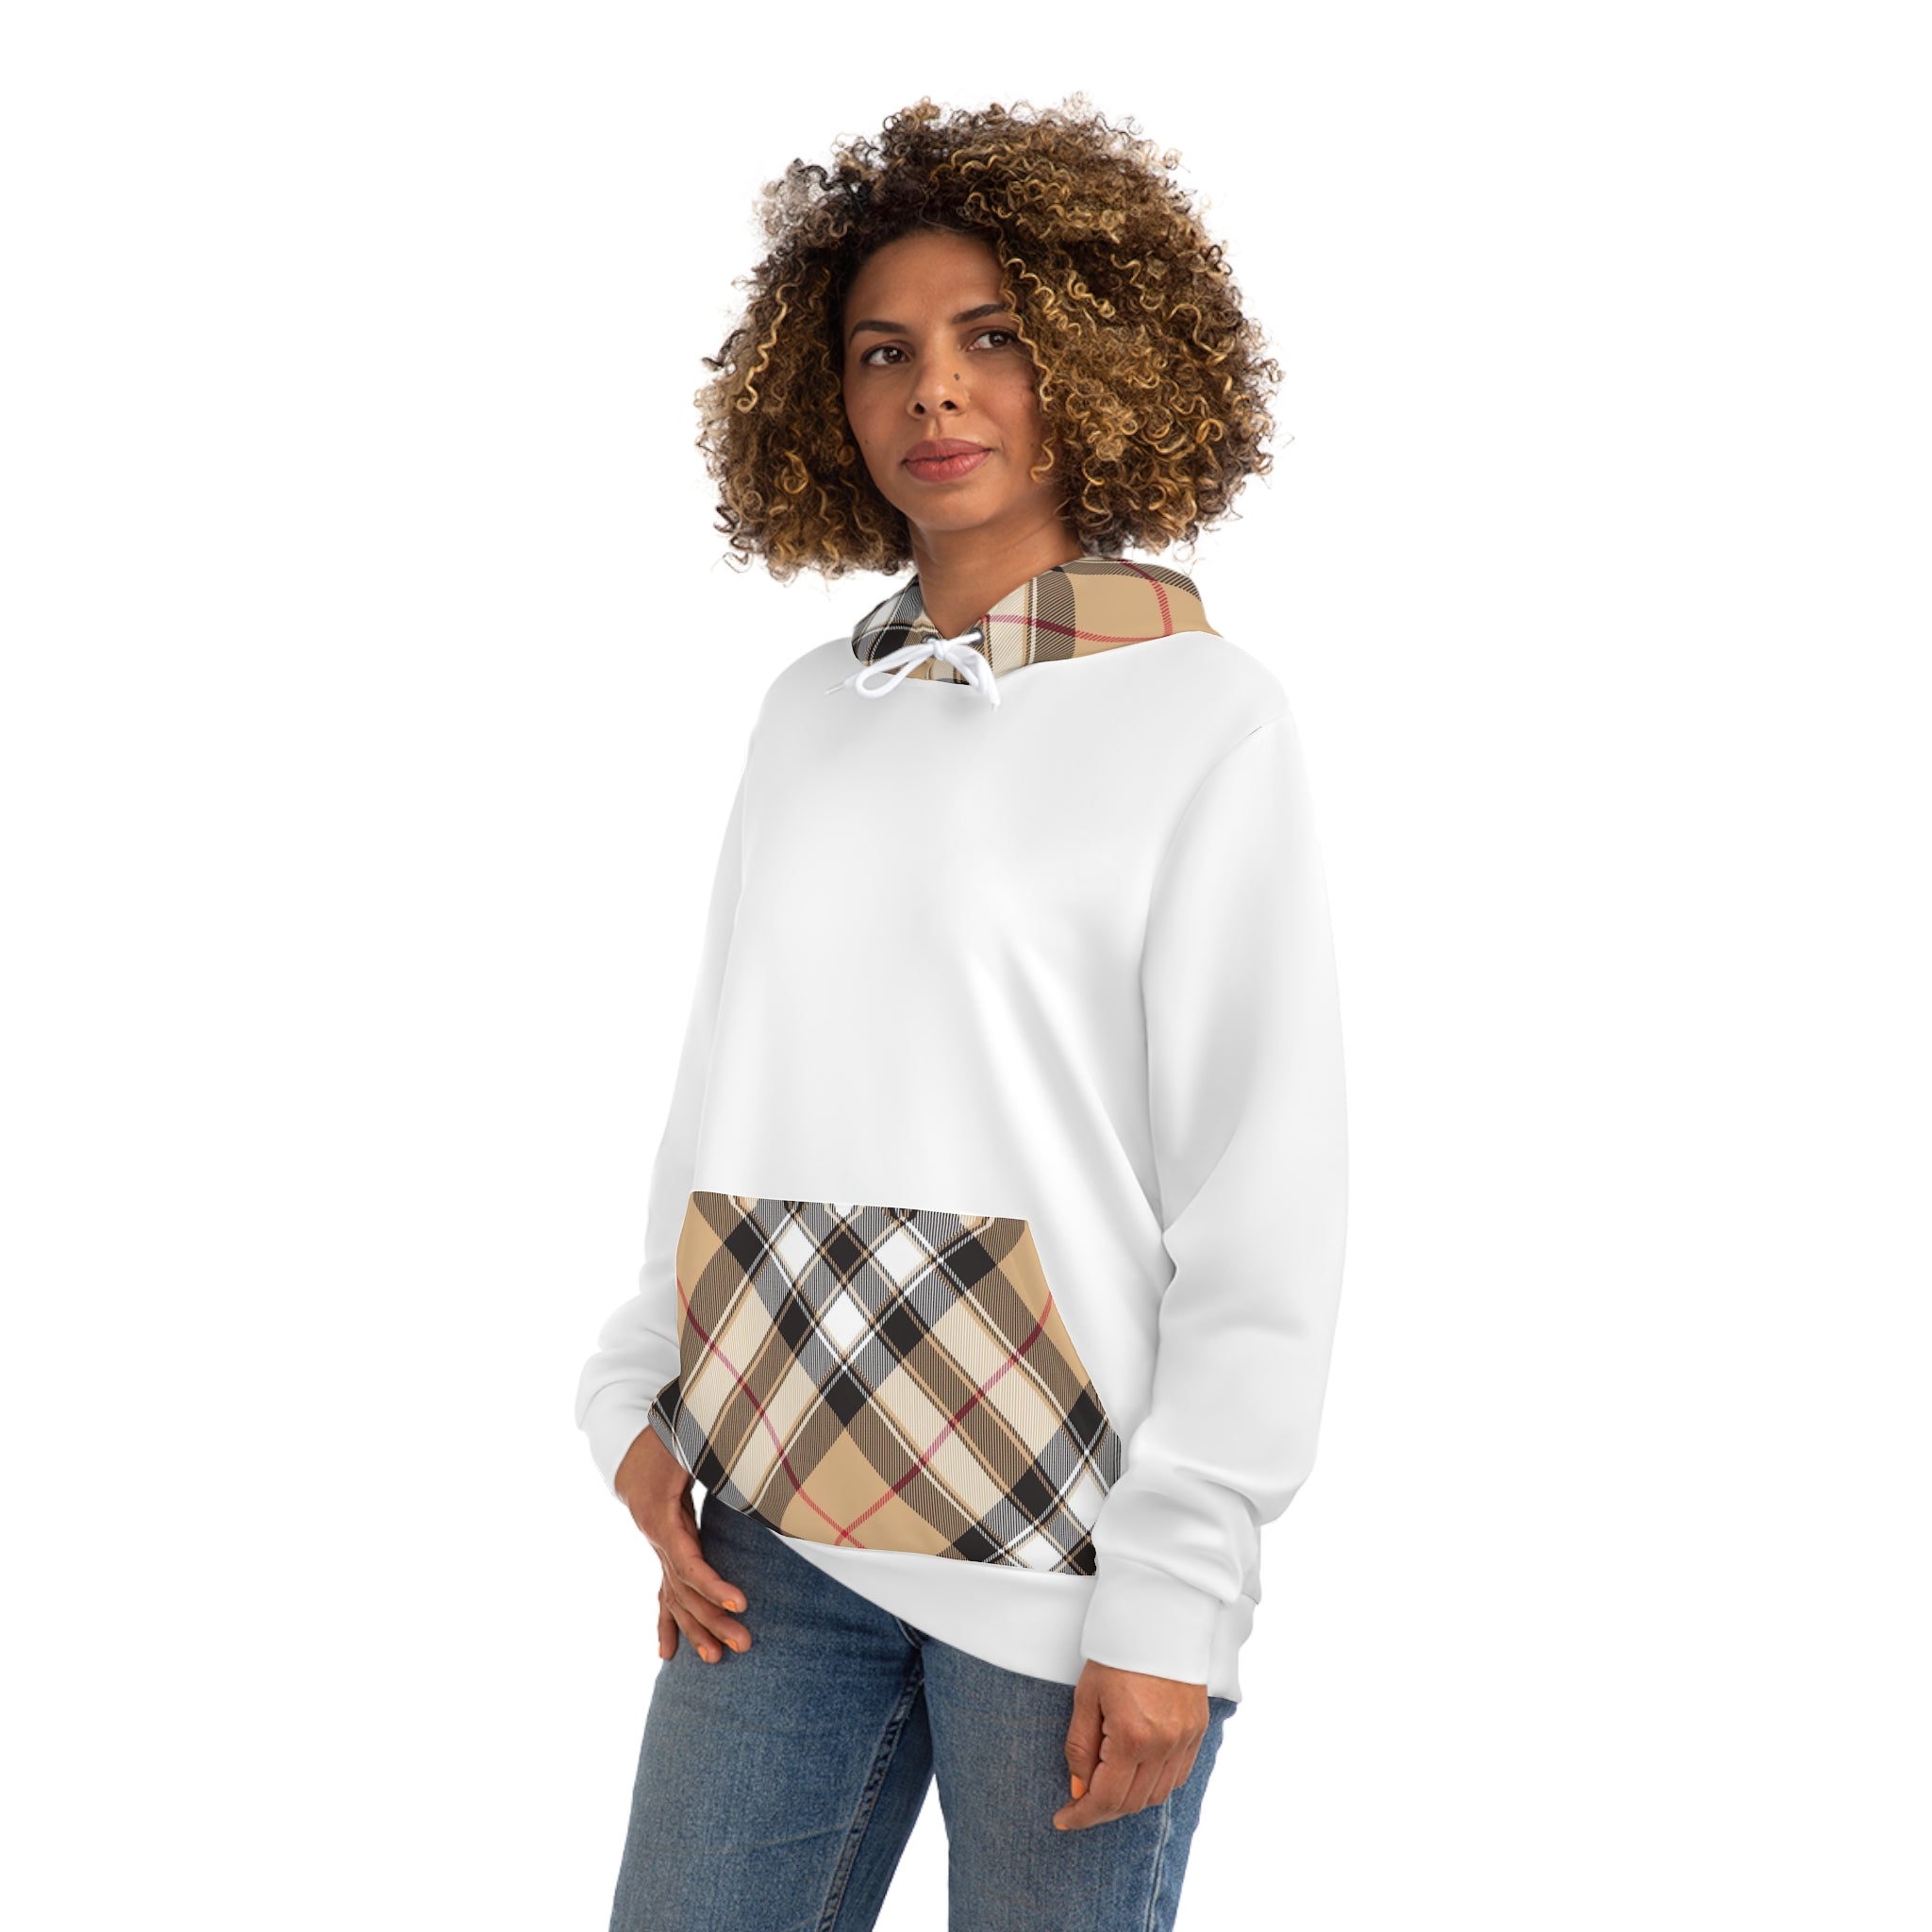 Groove Collection in Plaid (Red Line) Large Print Hood and Pocket Contrast Pullover Fashion Hoodie in White, Men's Plaid Contrast Hoodie